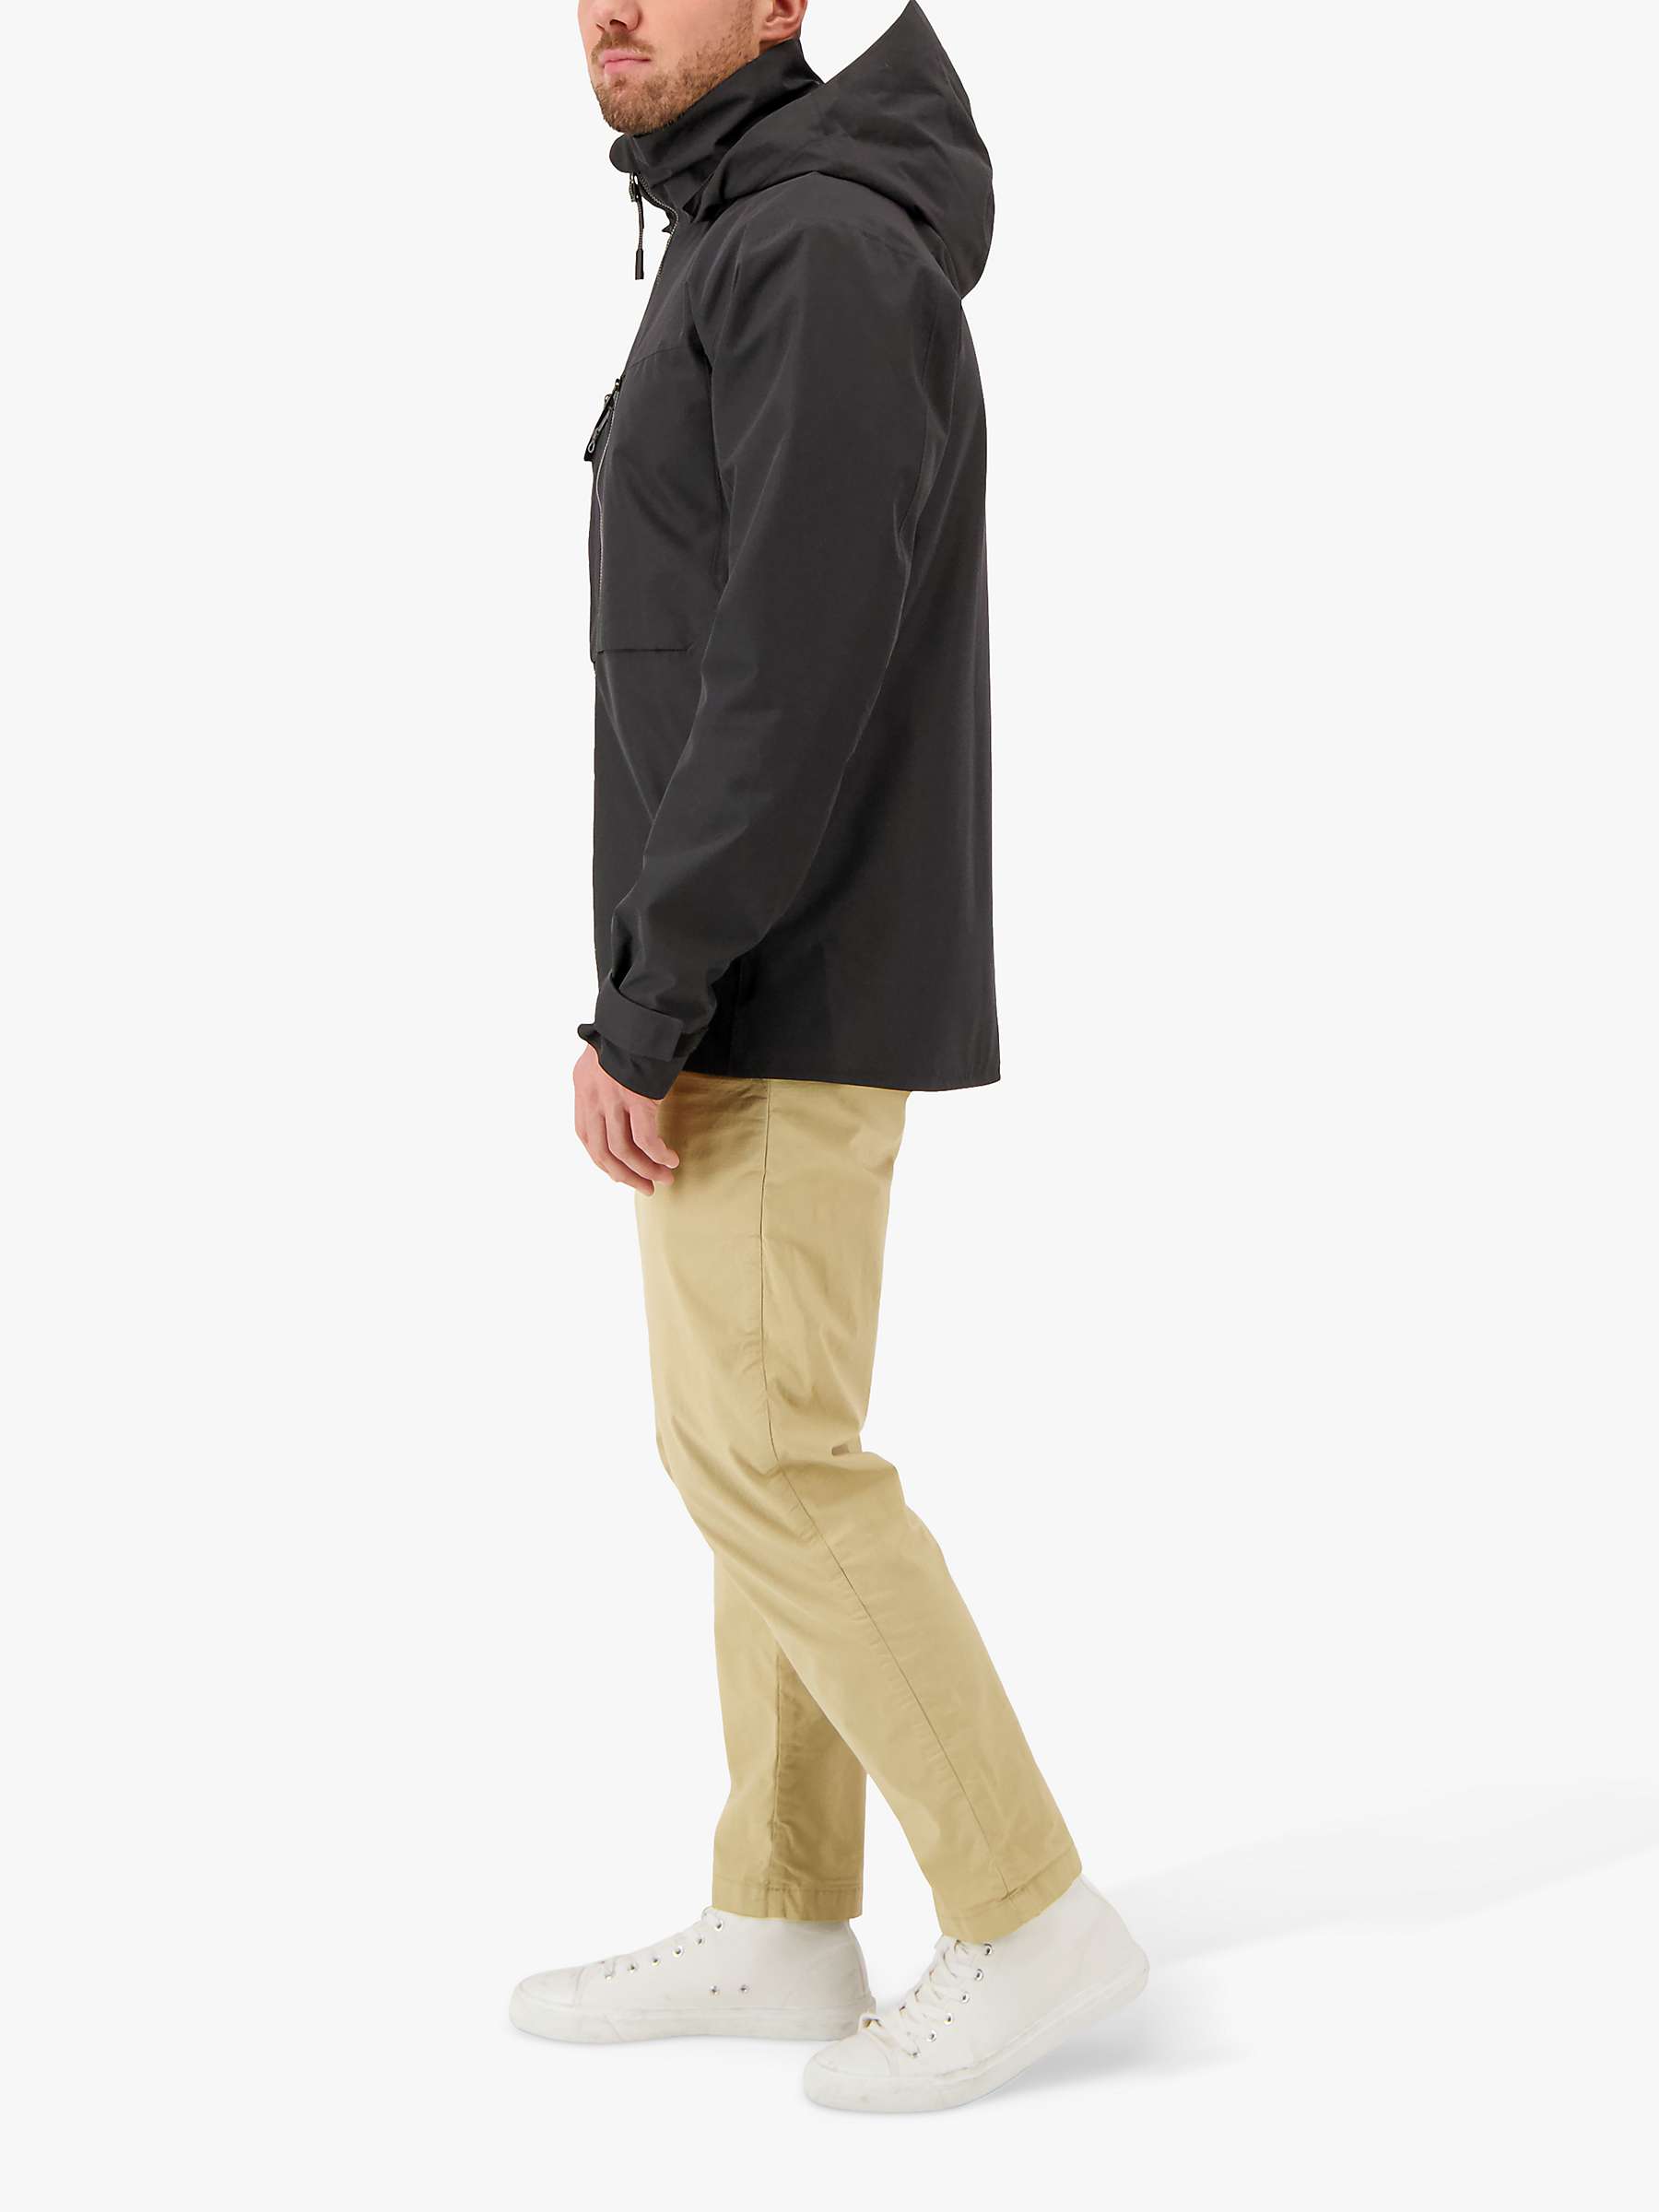 Buy Didriksons Aston Water Repellent Utility Jacket Online at johnlewis.com